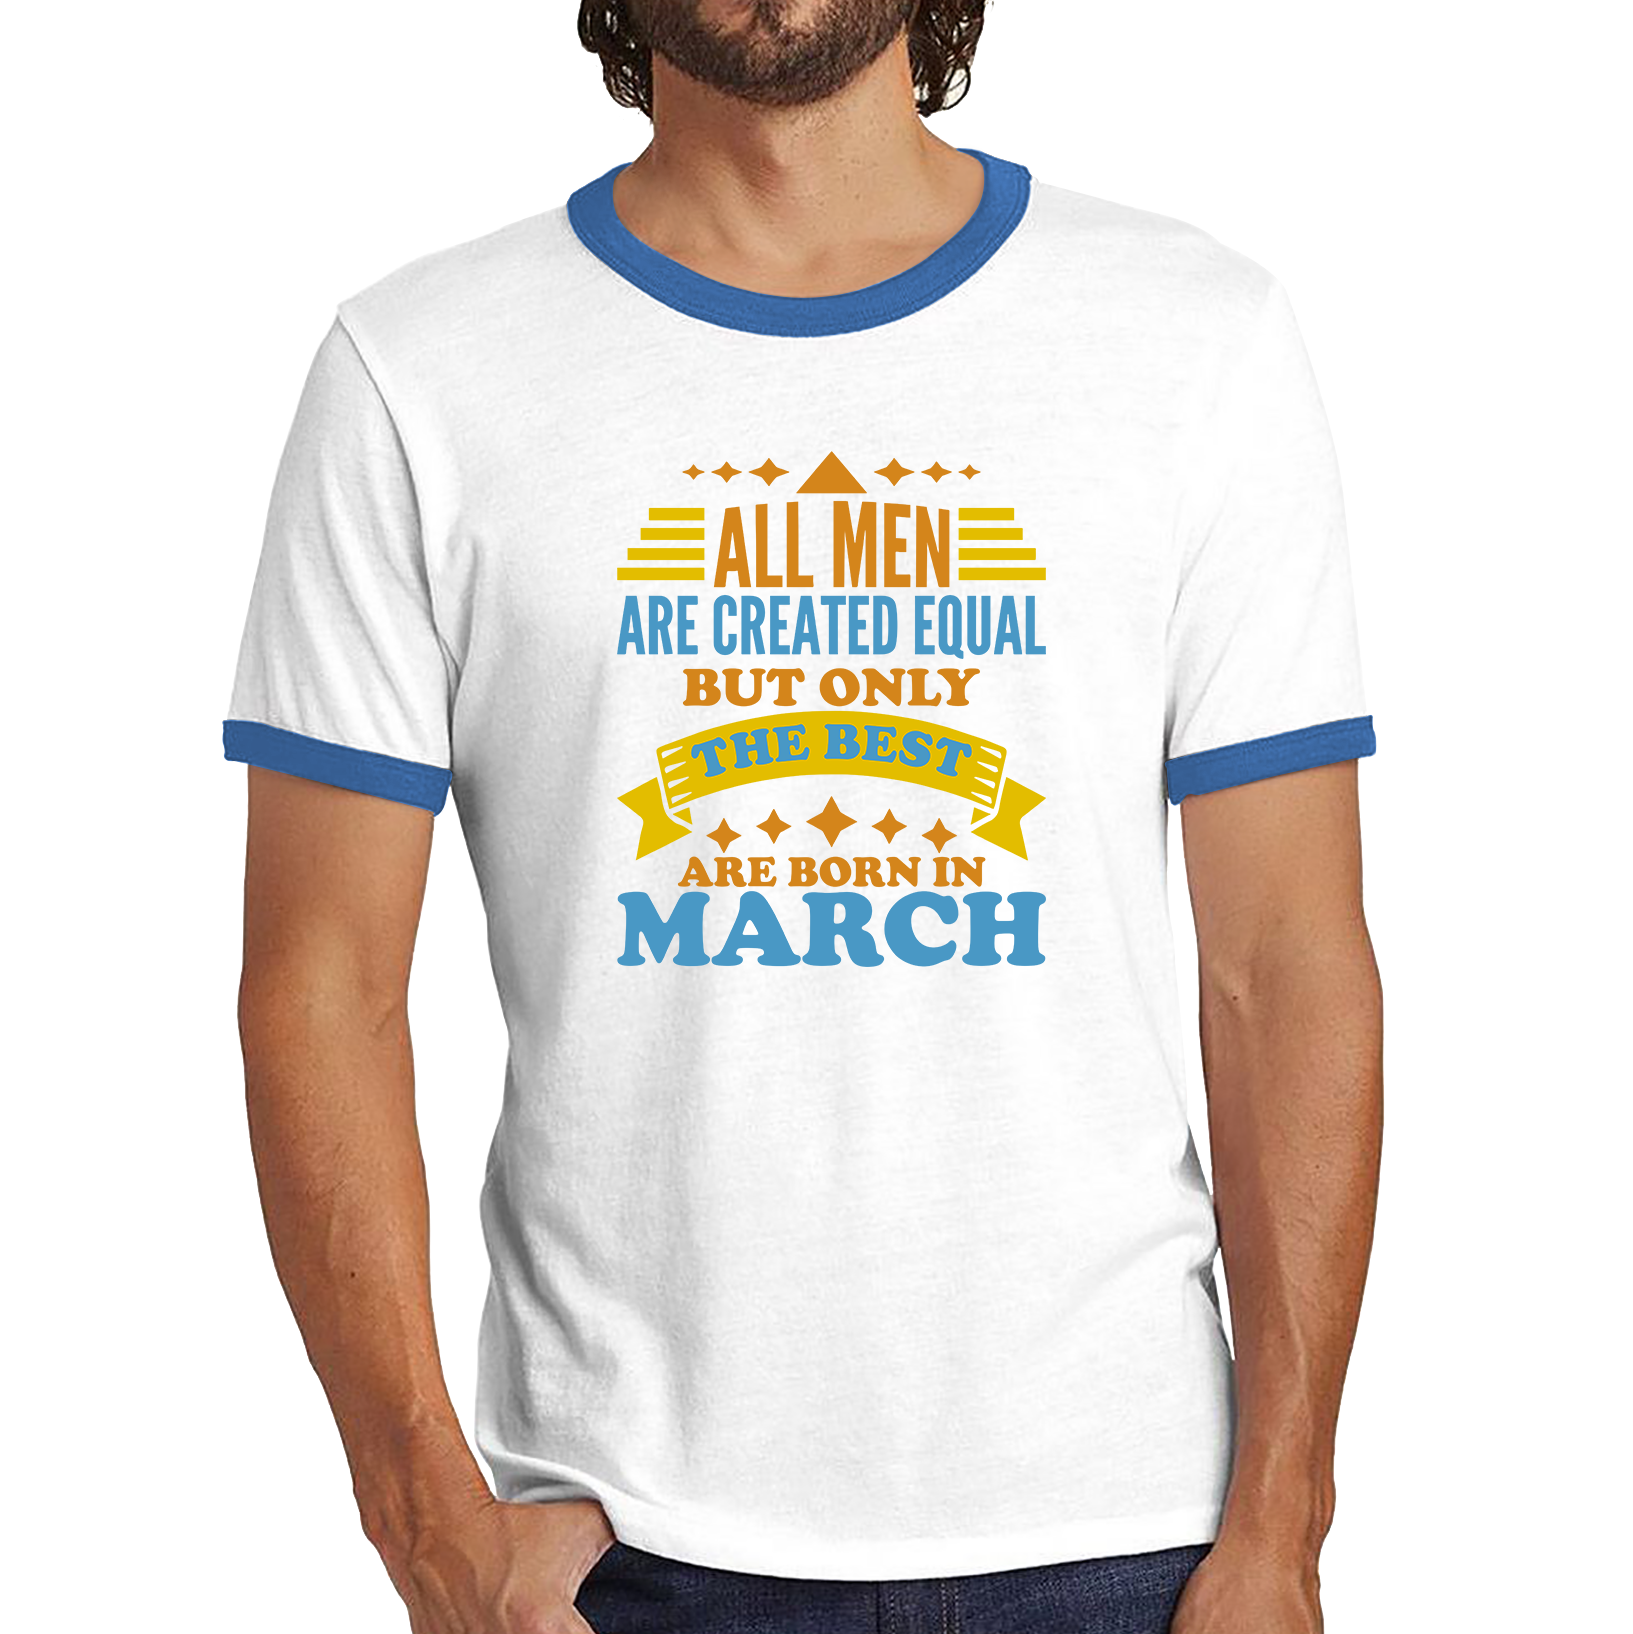 All Men Are Created Equal But Only The Best Are Born In March Funny Birthday Quote Ringer T Shirt